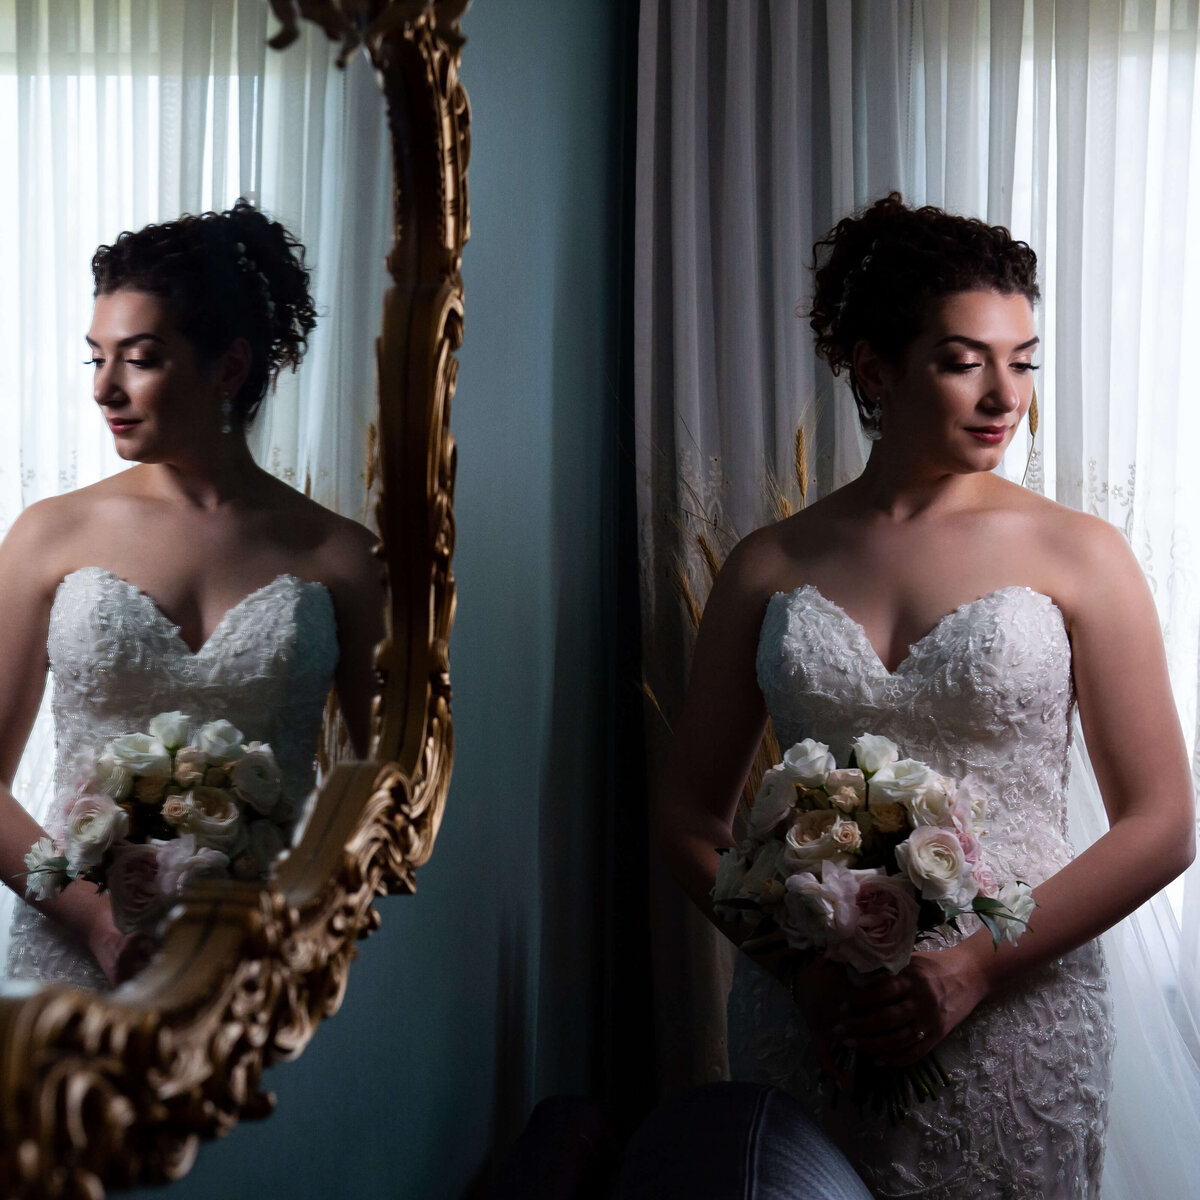 Ottawa wedding photography showing a mirror reflection of a stunning bride holding her bouquet